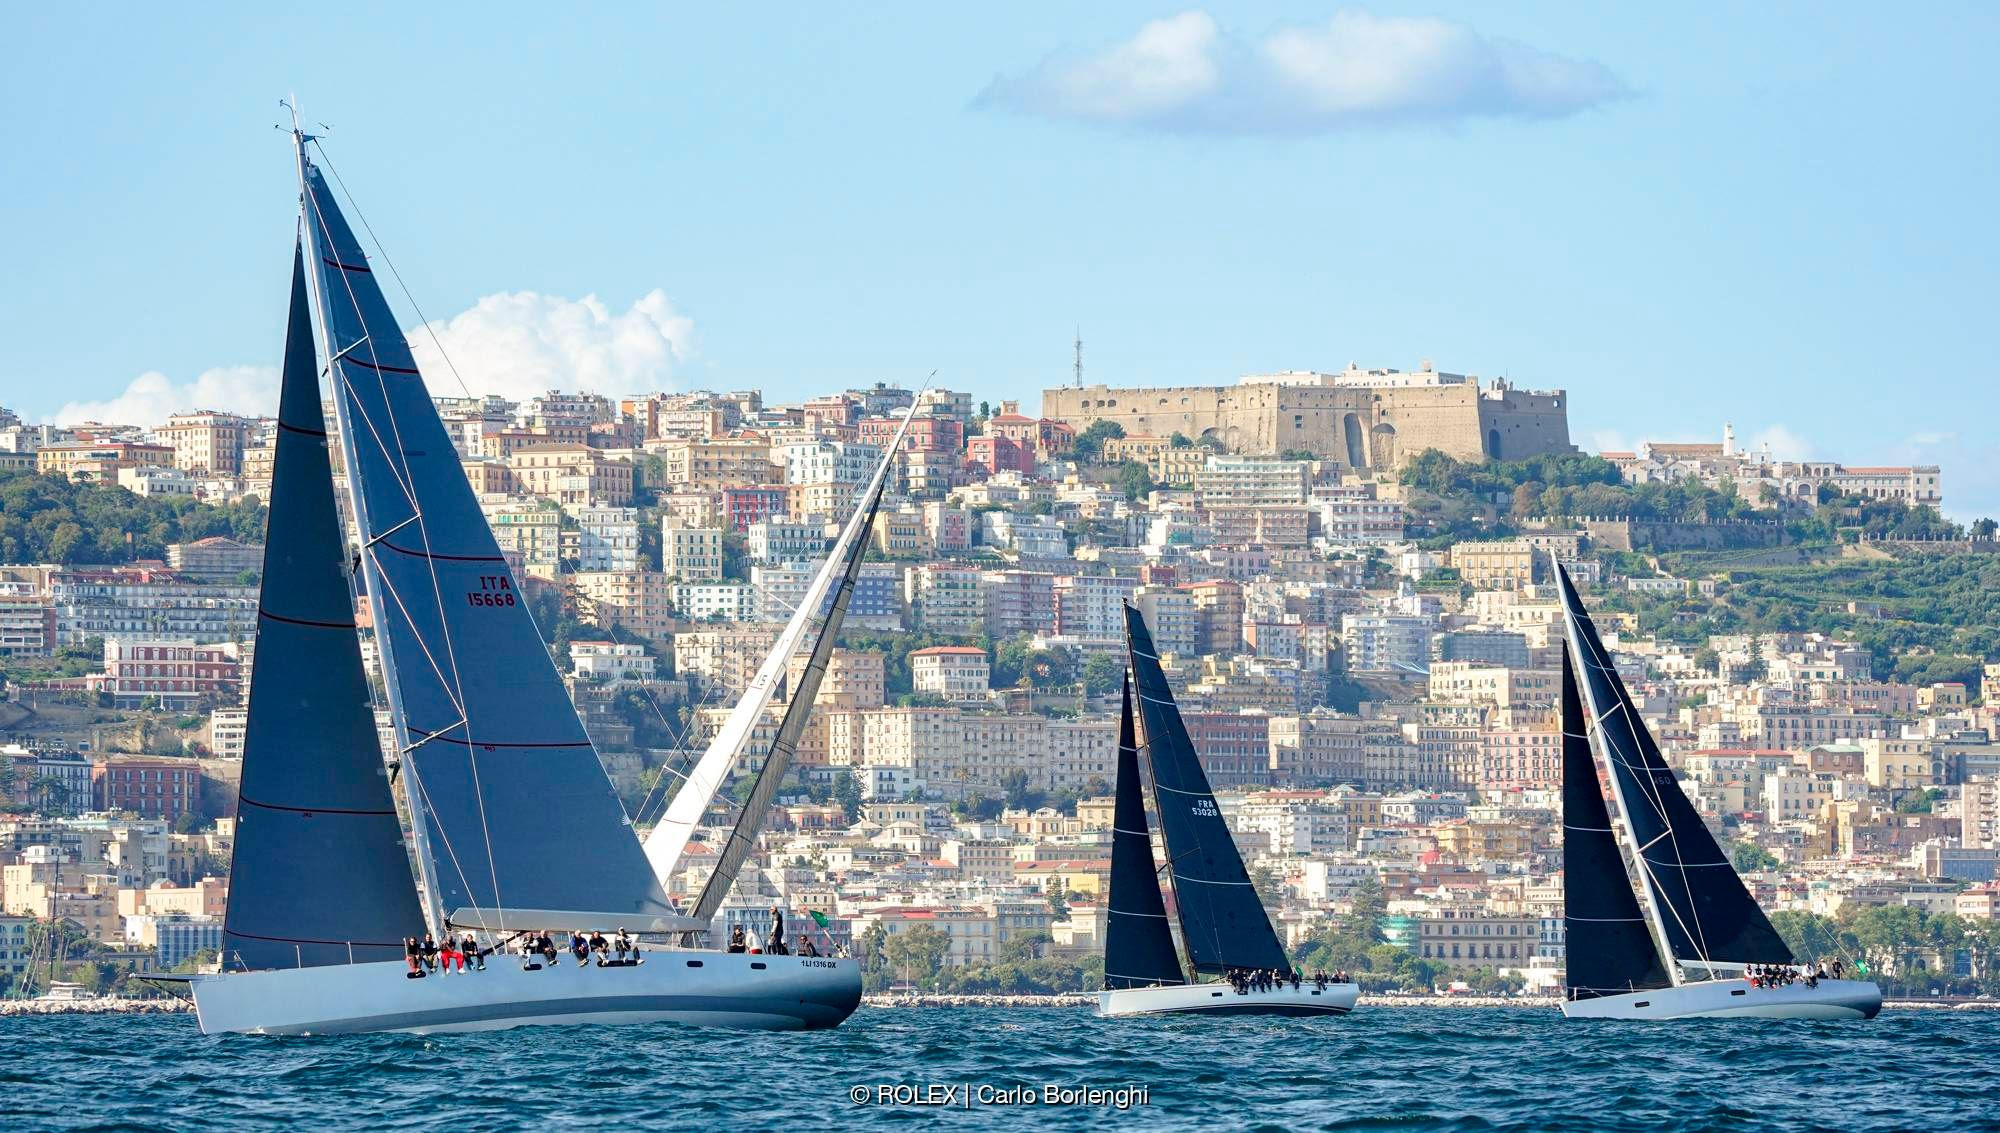 H20 (left) finished third overall ahead of Wallyño (right) while Jean-Pierre Dreau's Mylius 60 Lady First 3 (centre) was 8th overall in the full maxi fleet. Photo: ROLEX / Studio Borlenghi